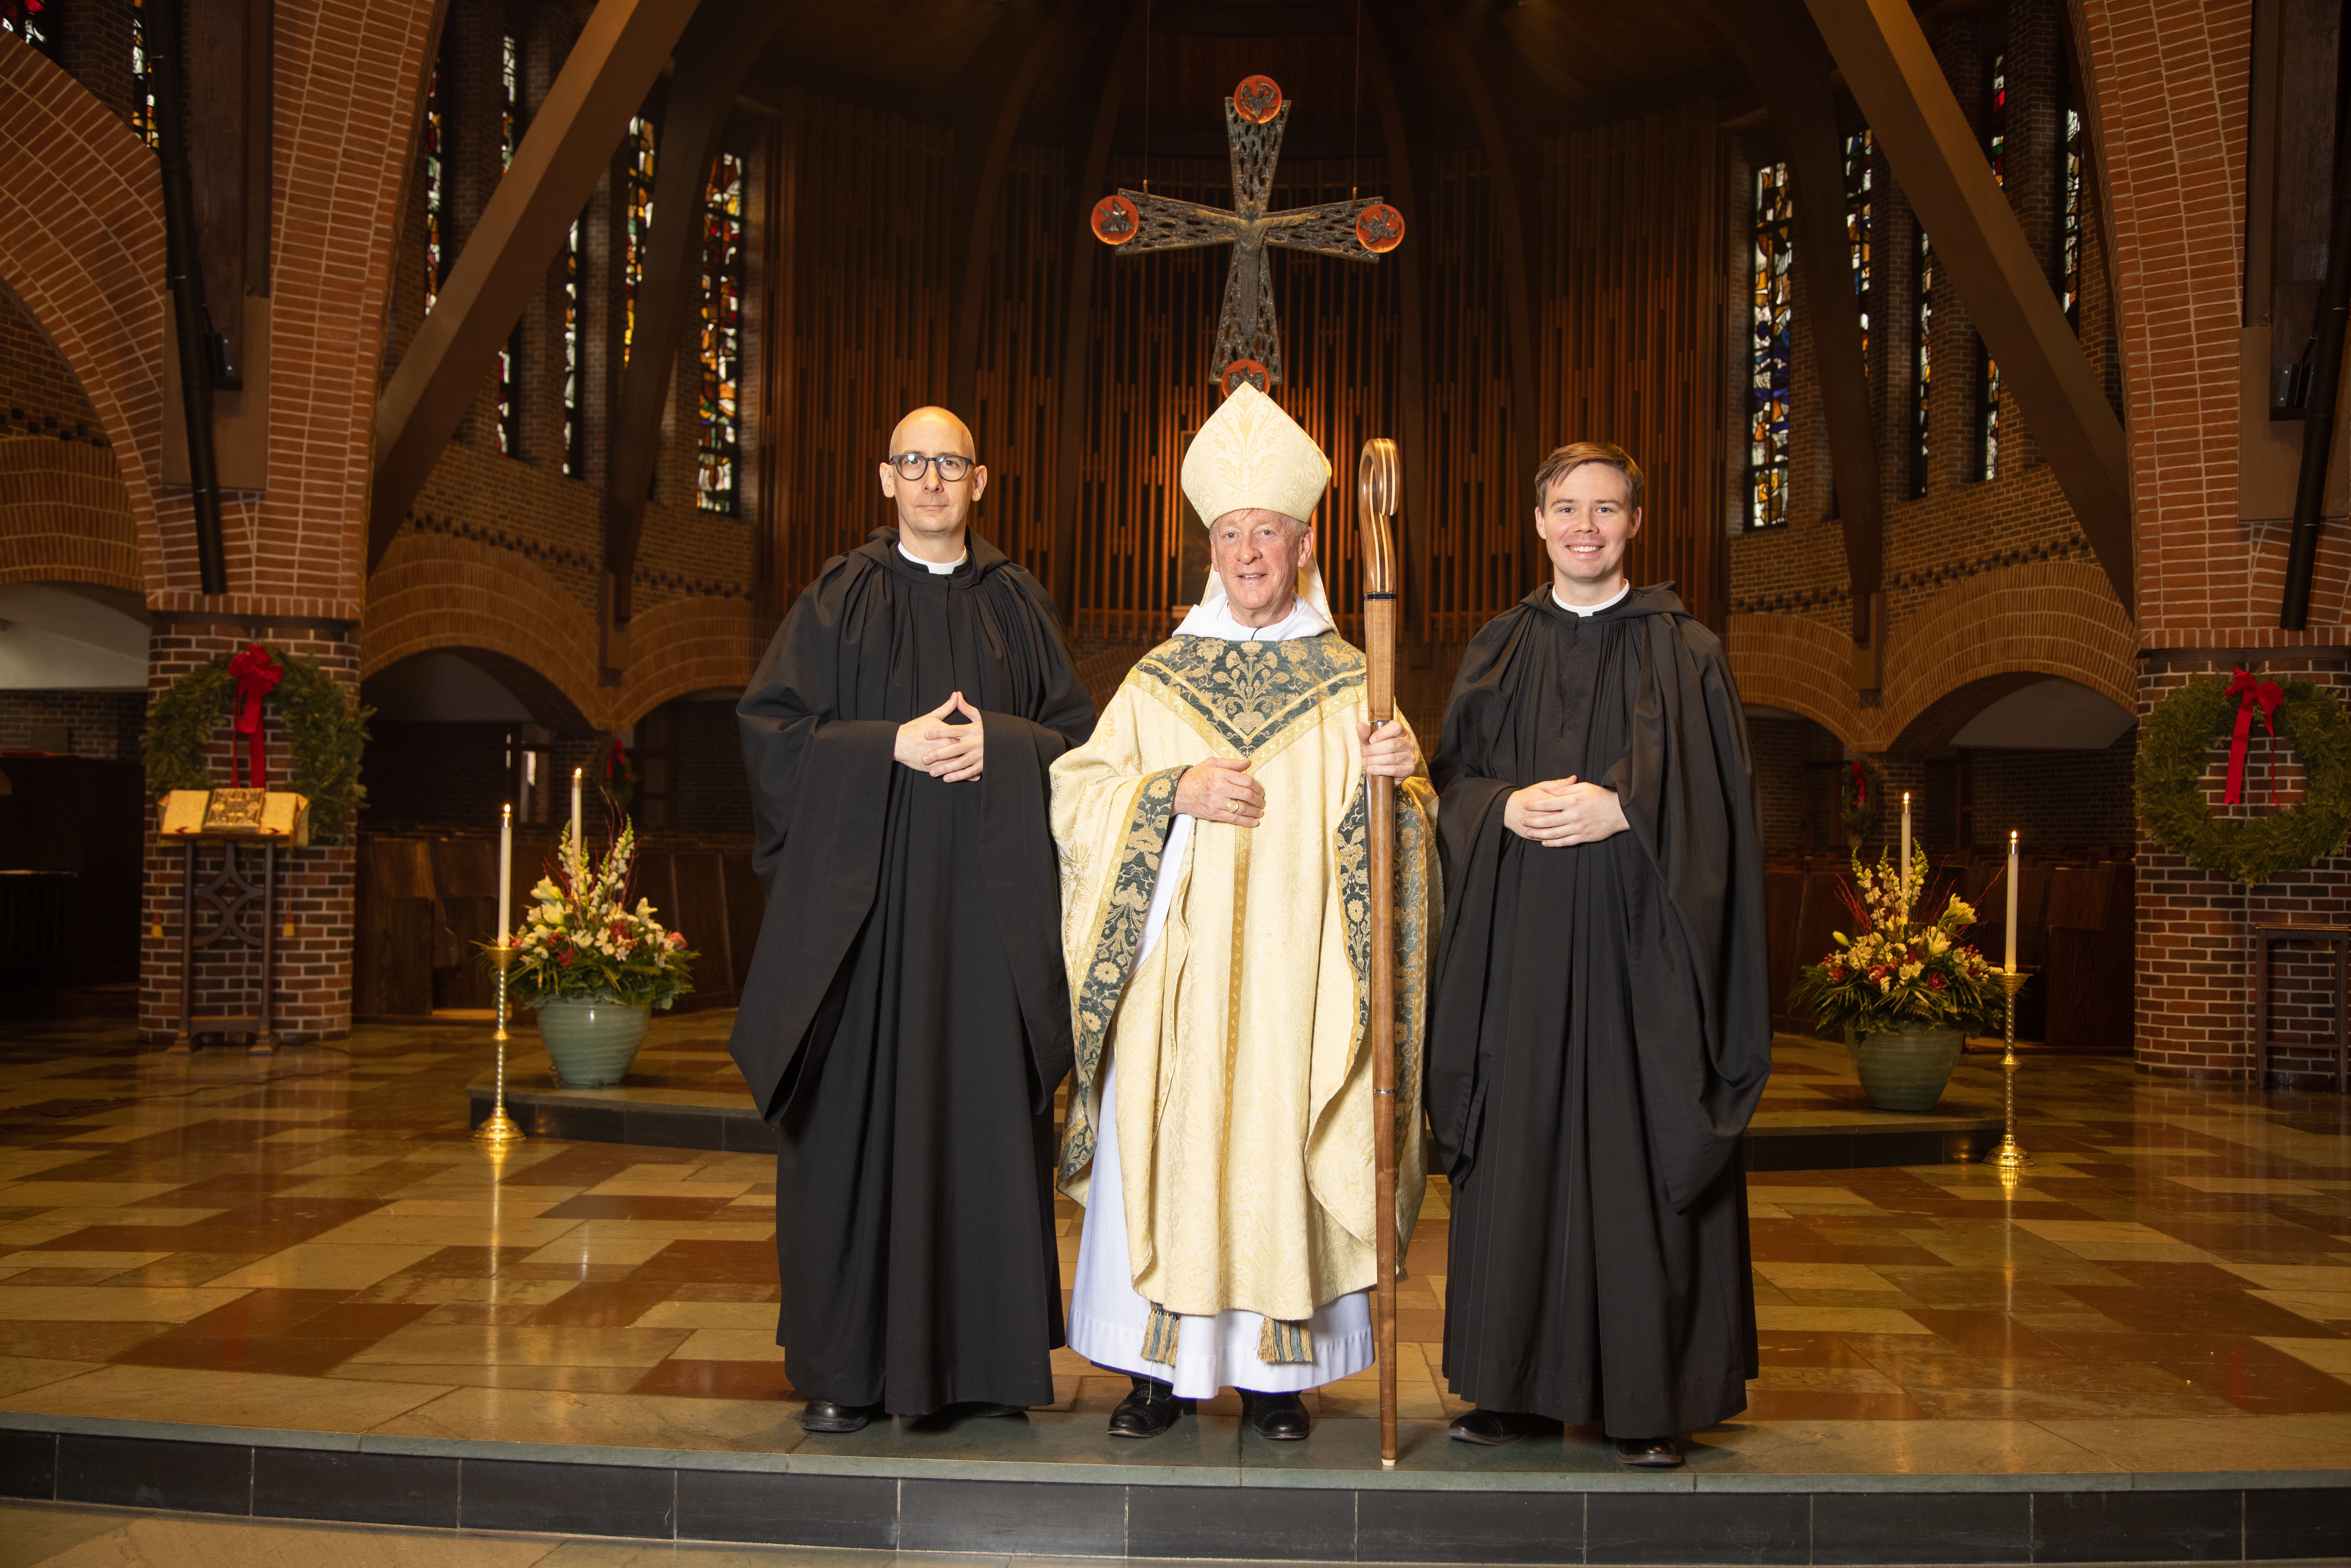 Brother, Dunstan, Abbot Mark, and Brother Titus